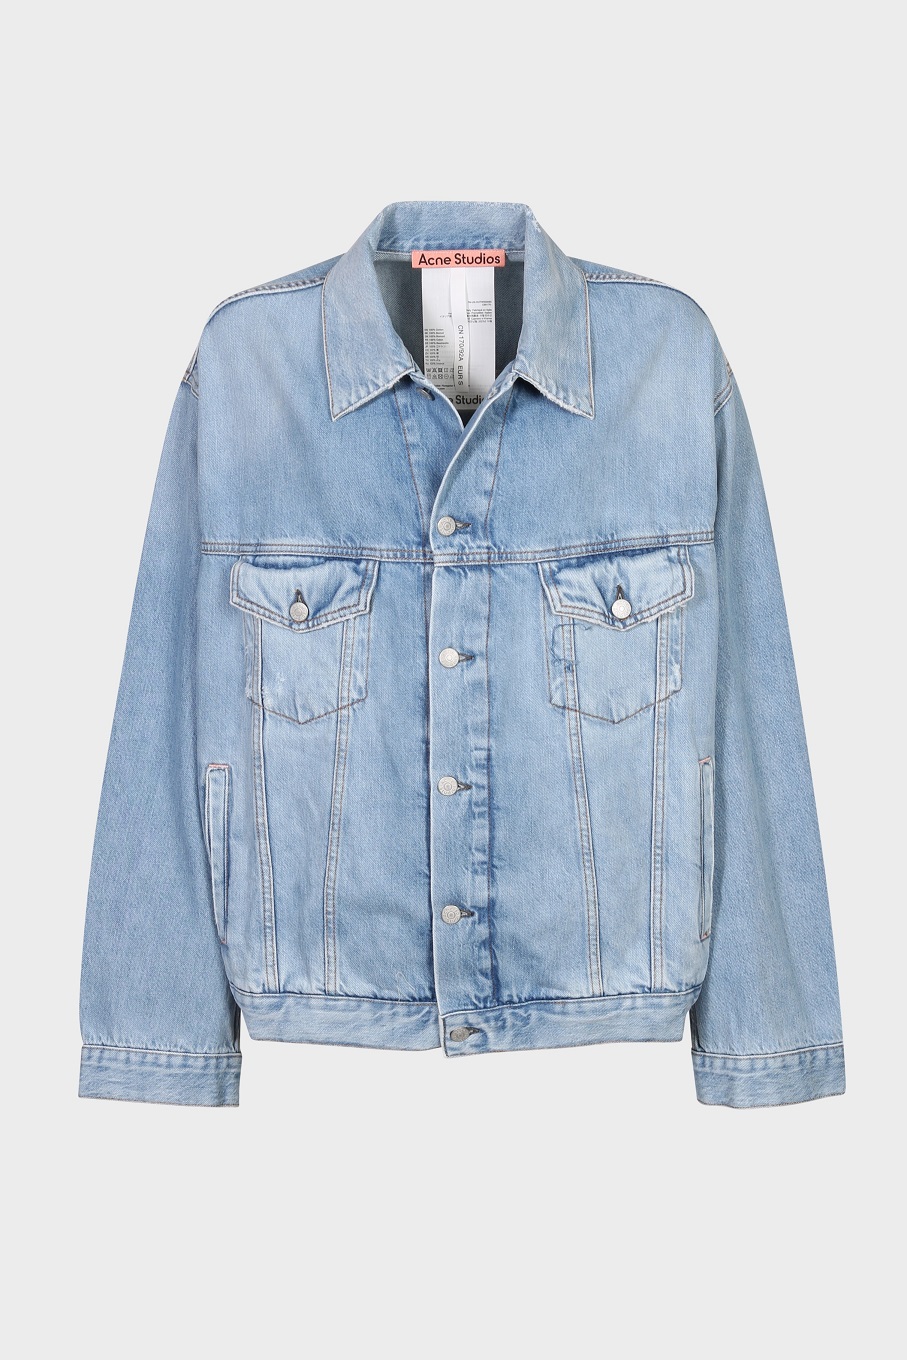 ACNE STUDIOS Relaxed Fit Denim Jacket in Light Blue